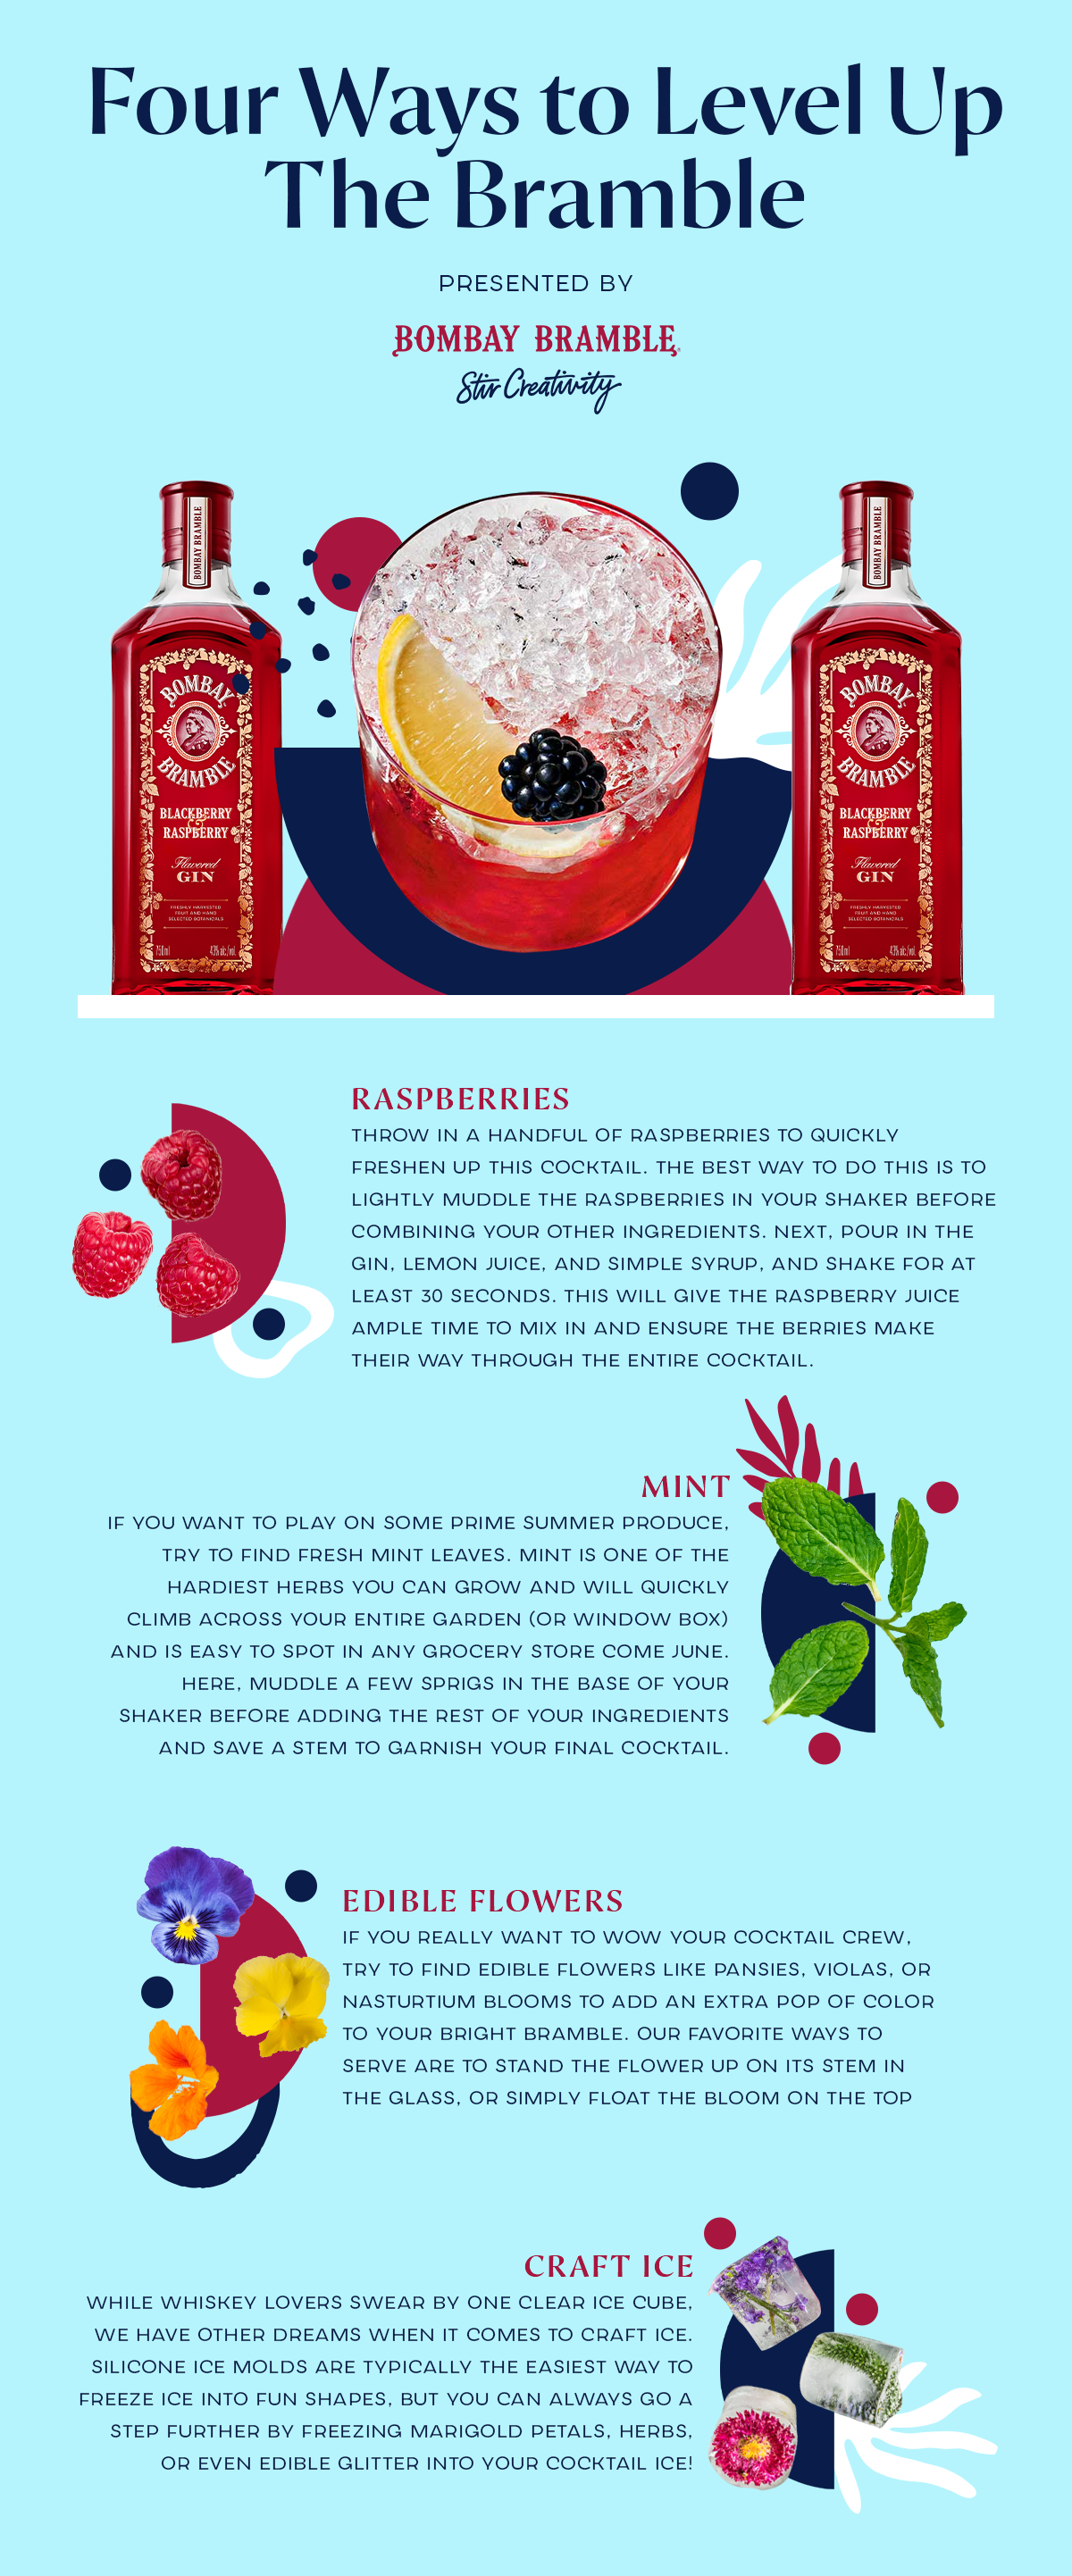 an infographic showing how to make the Bombay Bramble & Tonic cocktail.